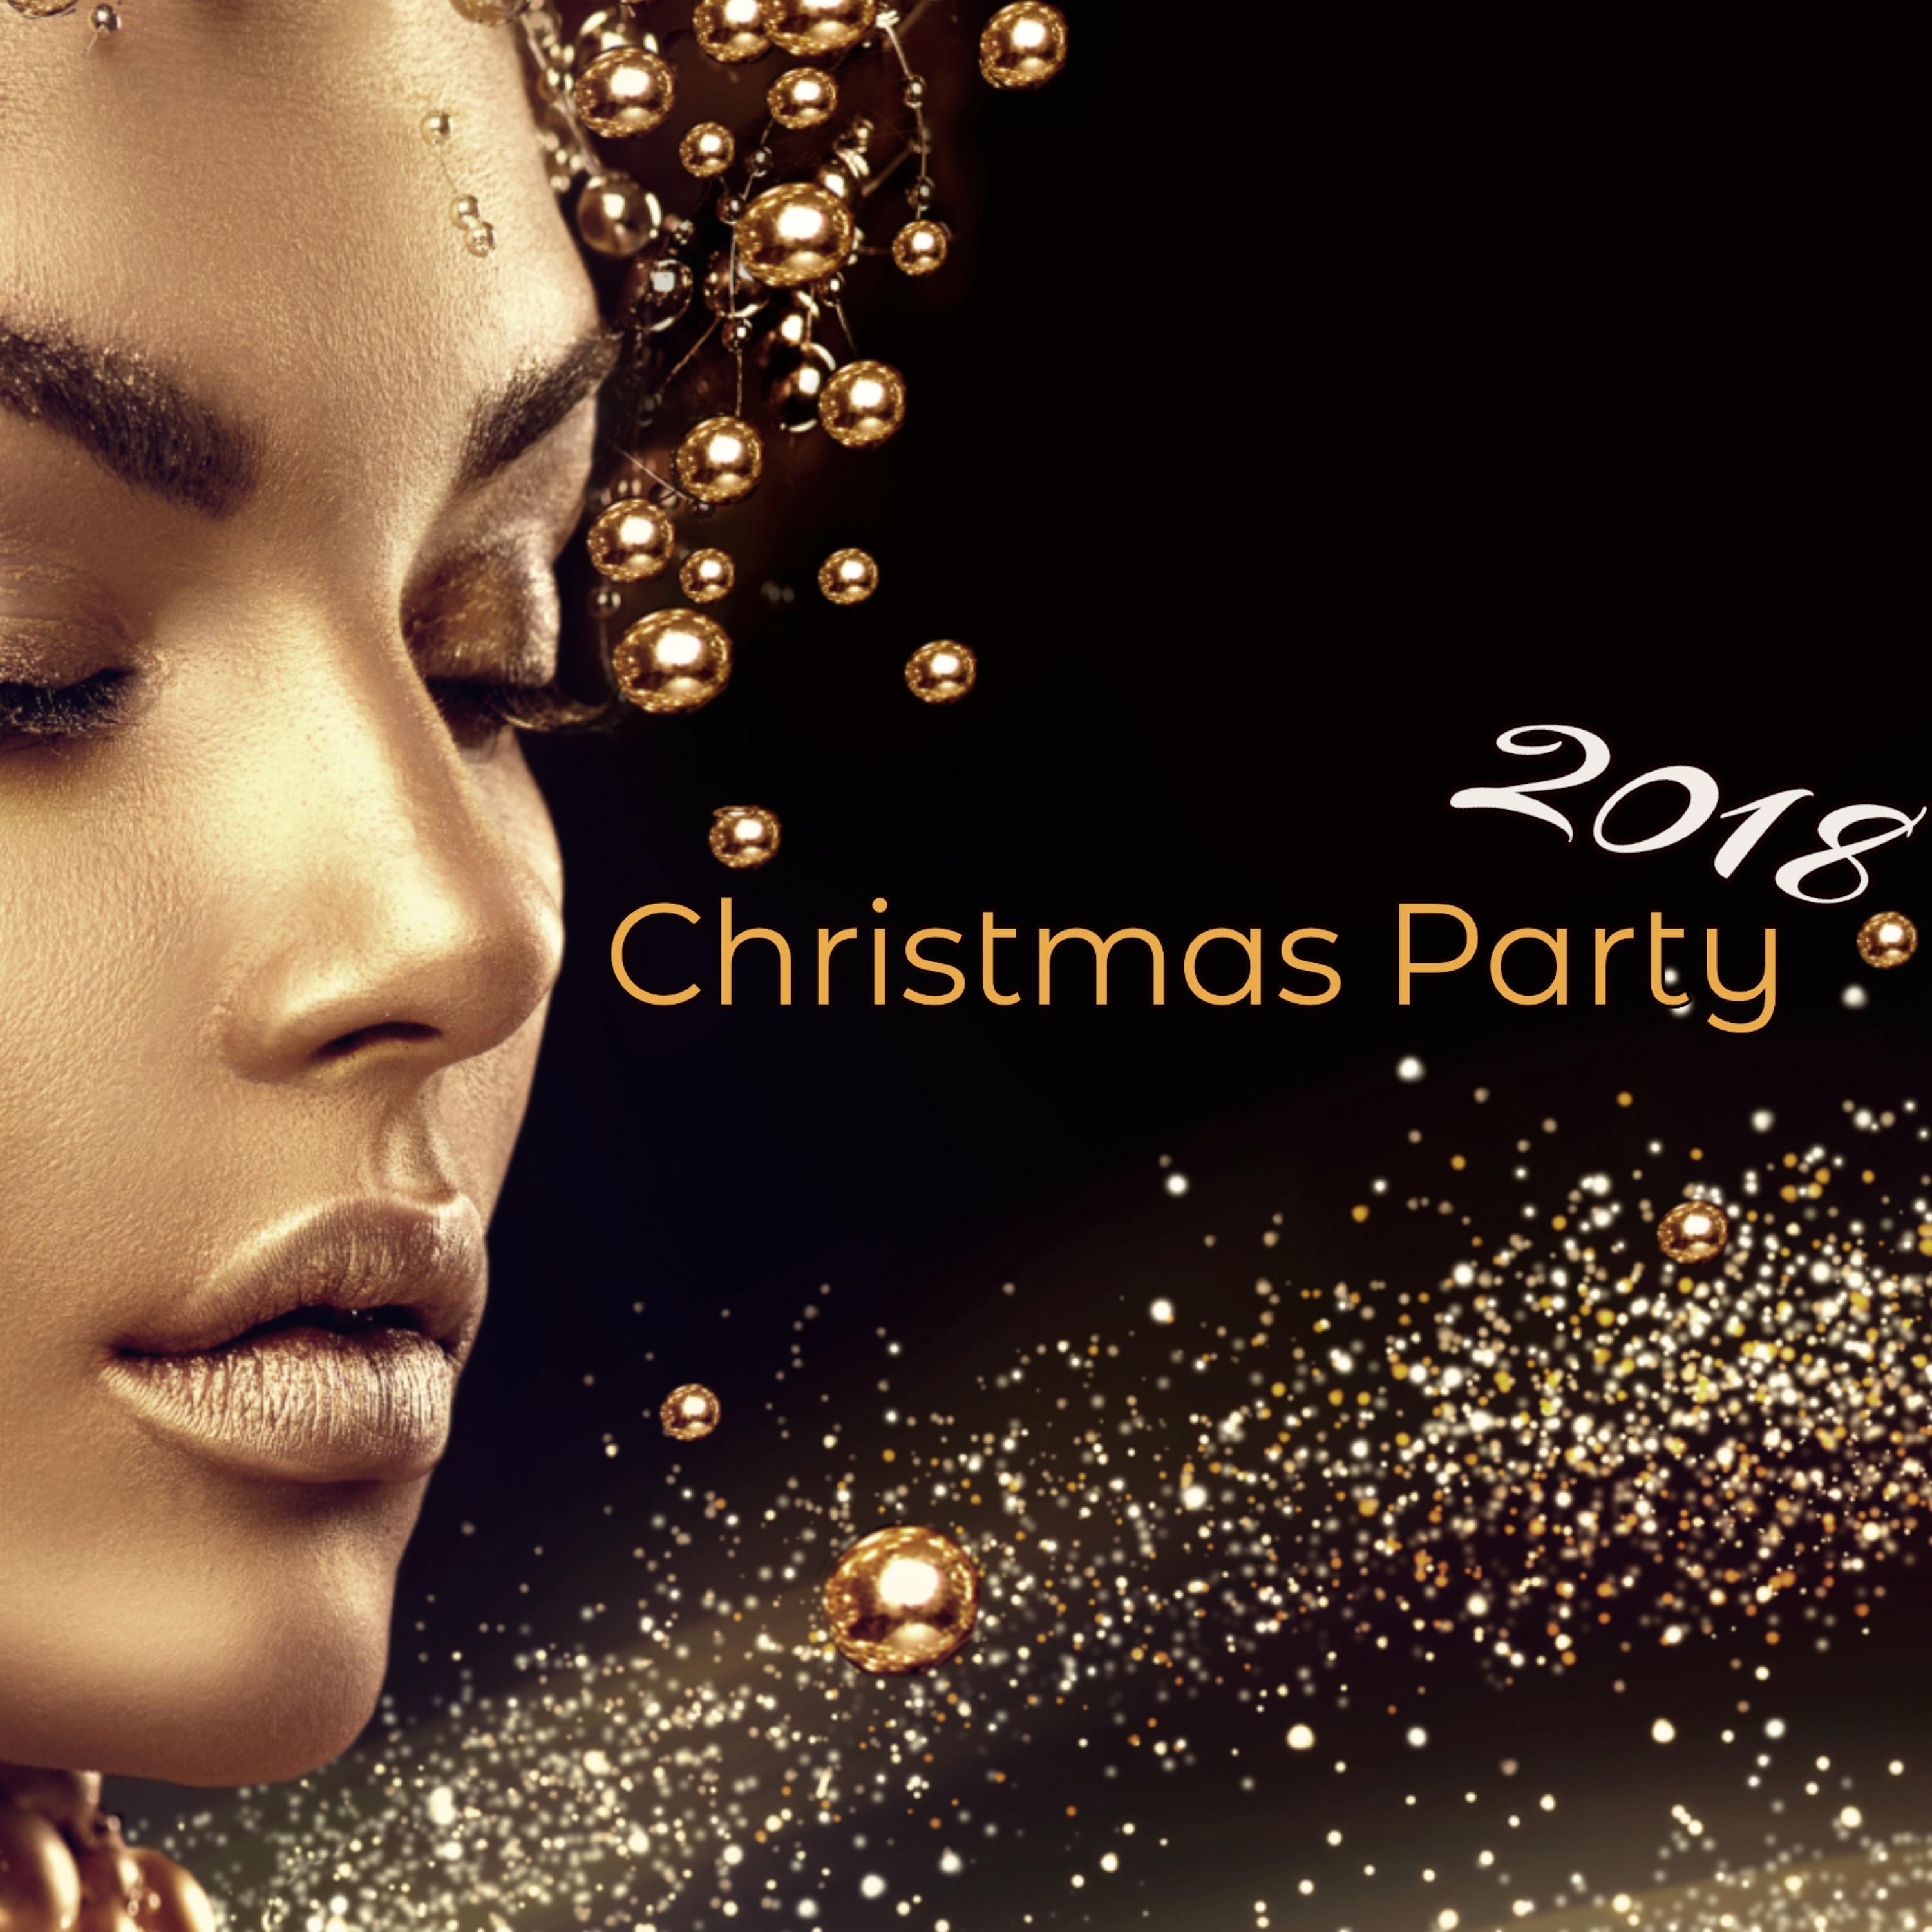 Christmas Party 2018  Electronic Christmas Party Songs, Lounge  House Xmas Music for Cocktails  Drinks Dancing Night